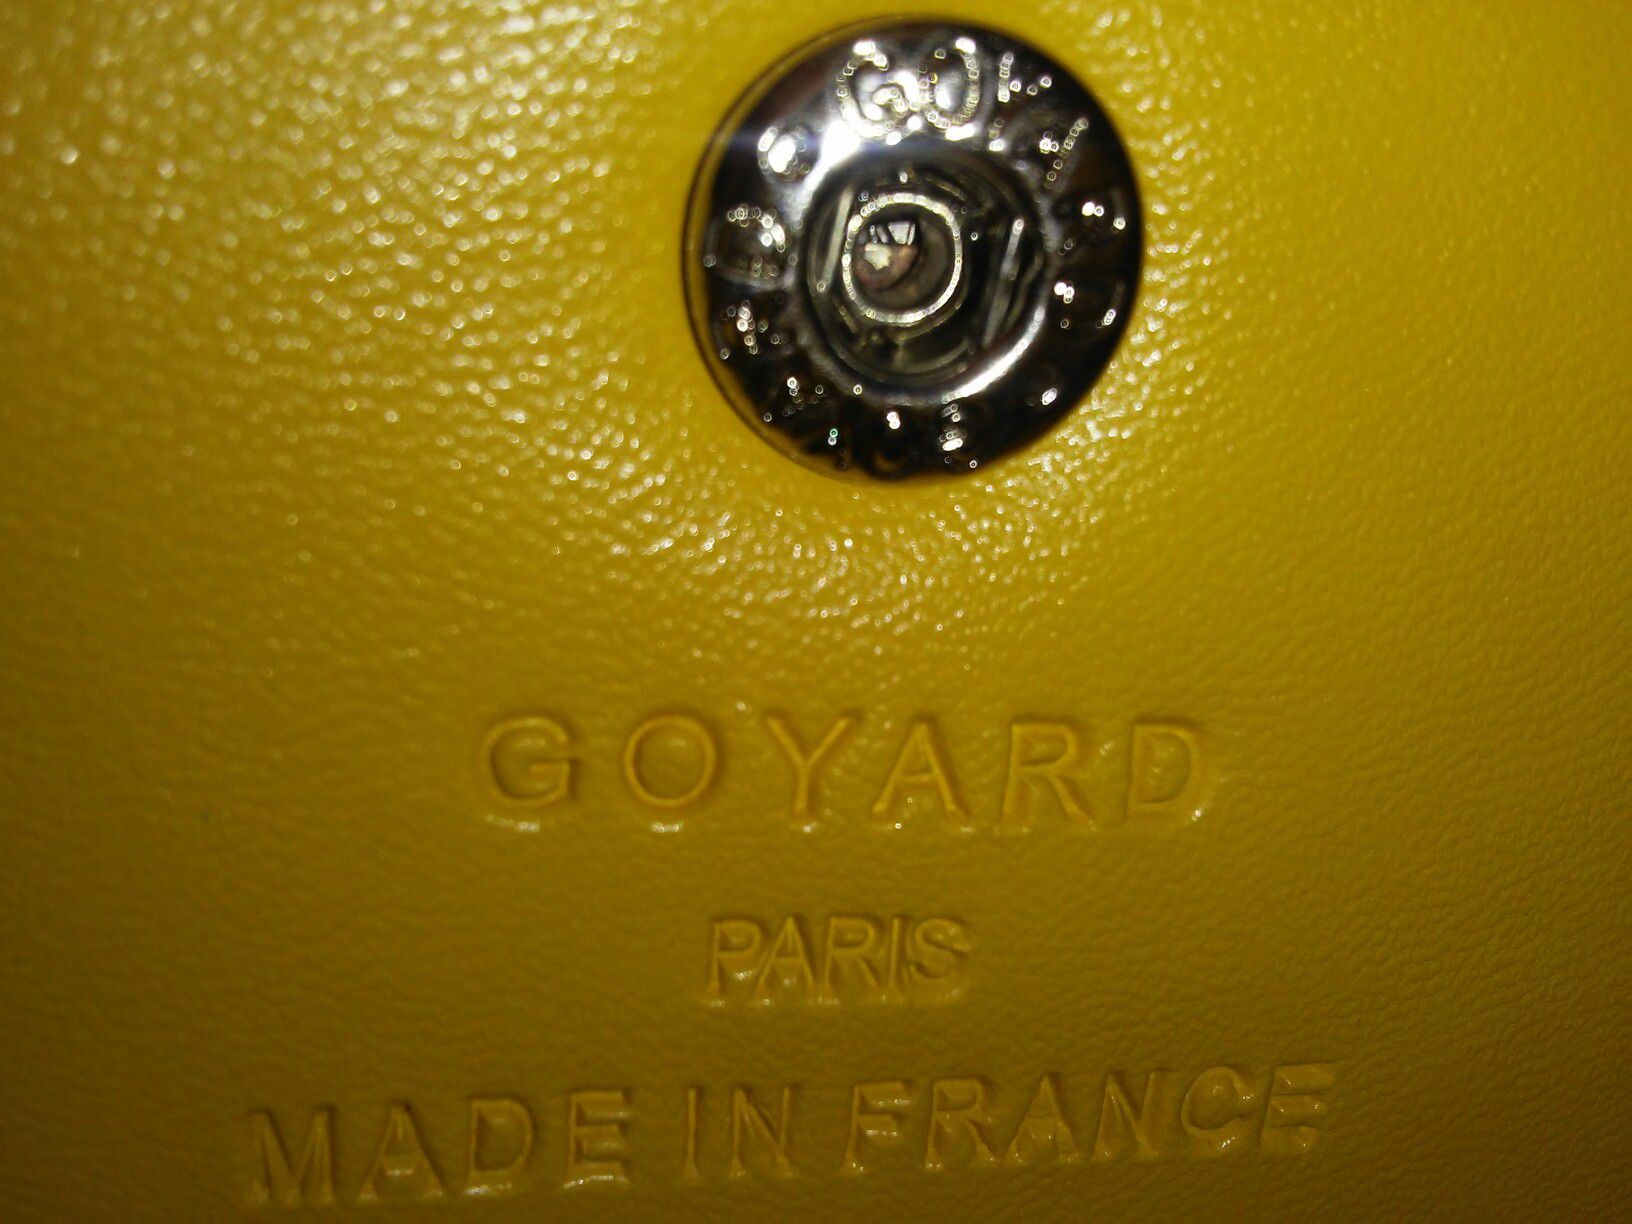 Goyard Saint Louis Junior Tote Bag with mini pouch yellow leather From –  yuzu22japan